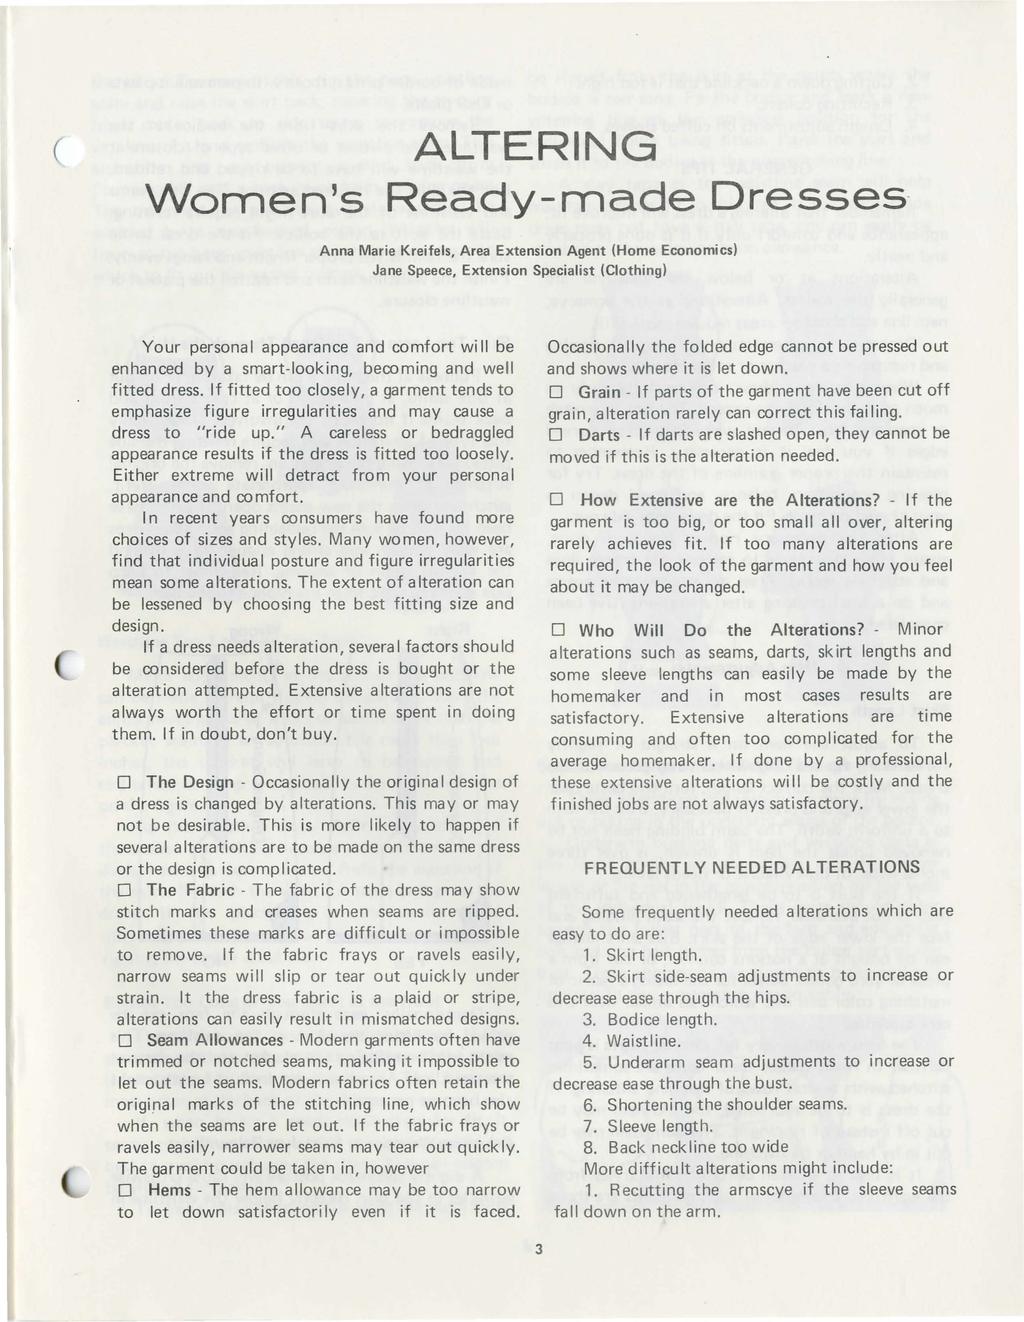 ALTERNG Women's Ready-made Dresses- Anna Marie Kreifels, Area Extension Agent (Home Economics) Jane Speece, Extension Specialist (Clothing) Your persona appearance and comfort wi be enhanced by a